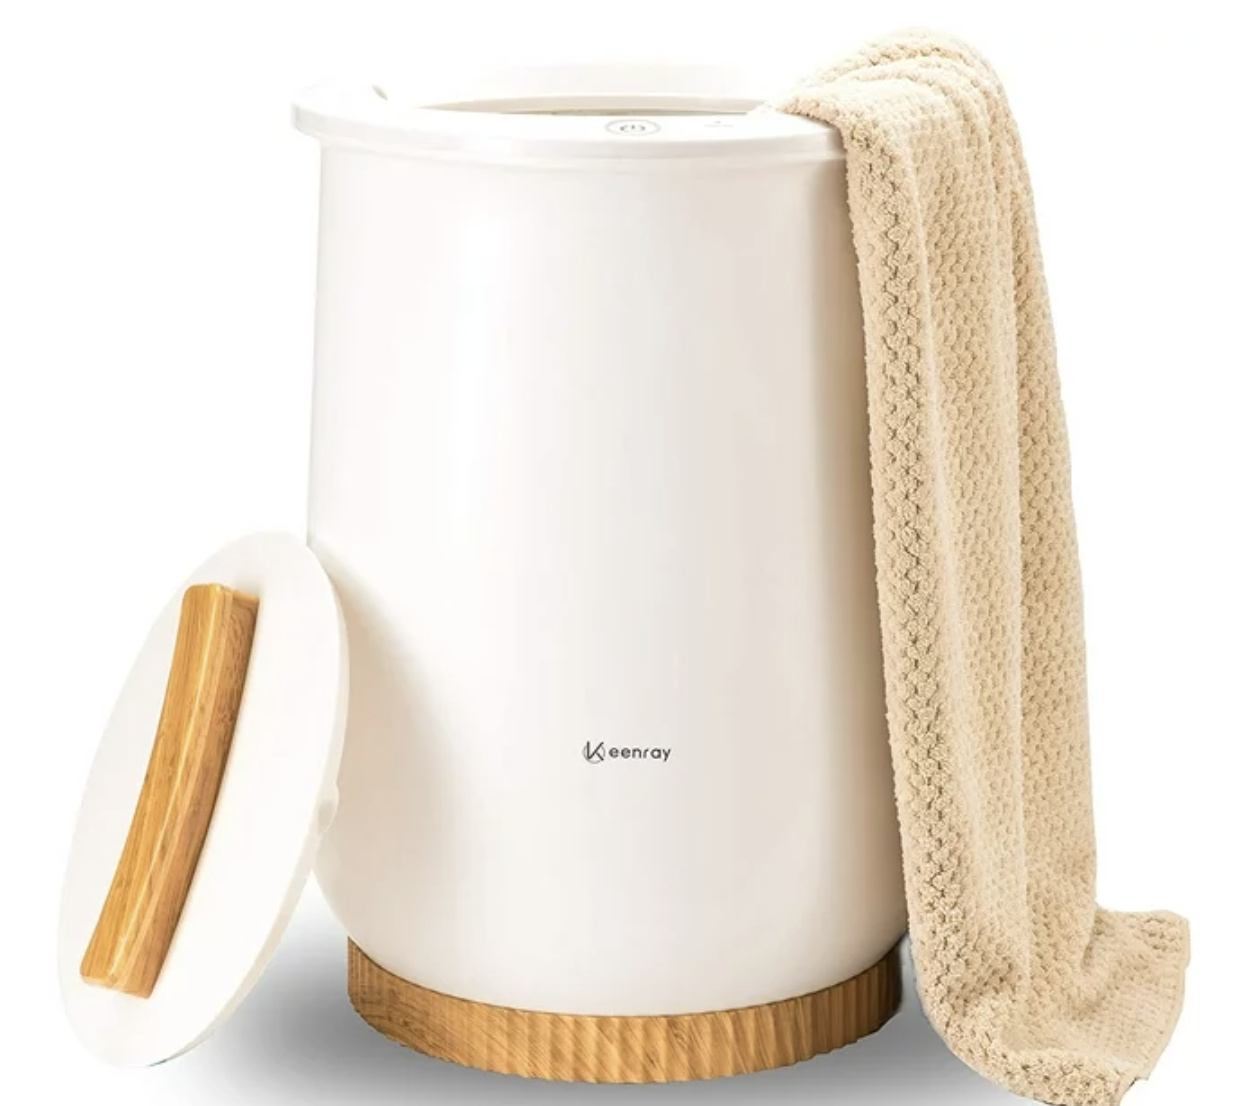 Portable white fabric steamer with a wooden handle and base, with a beige knit material draped over it